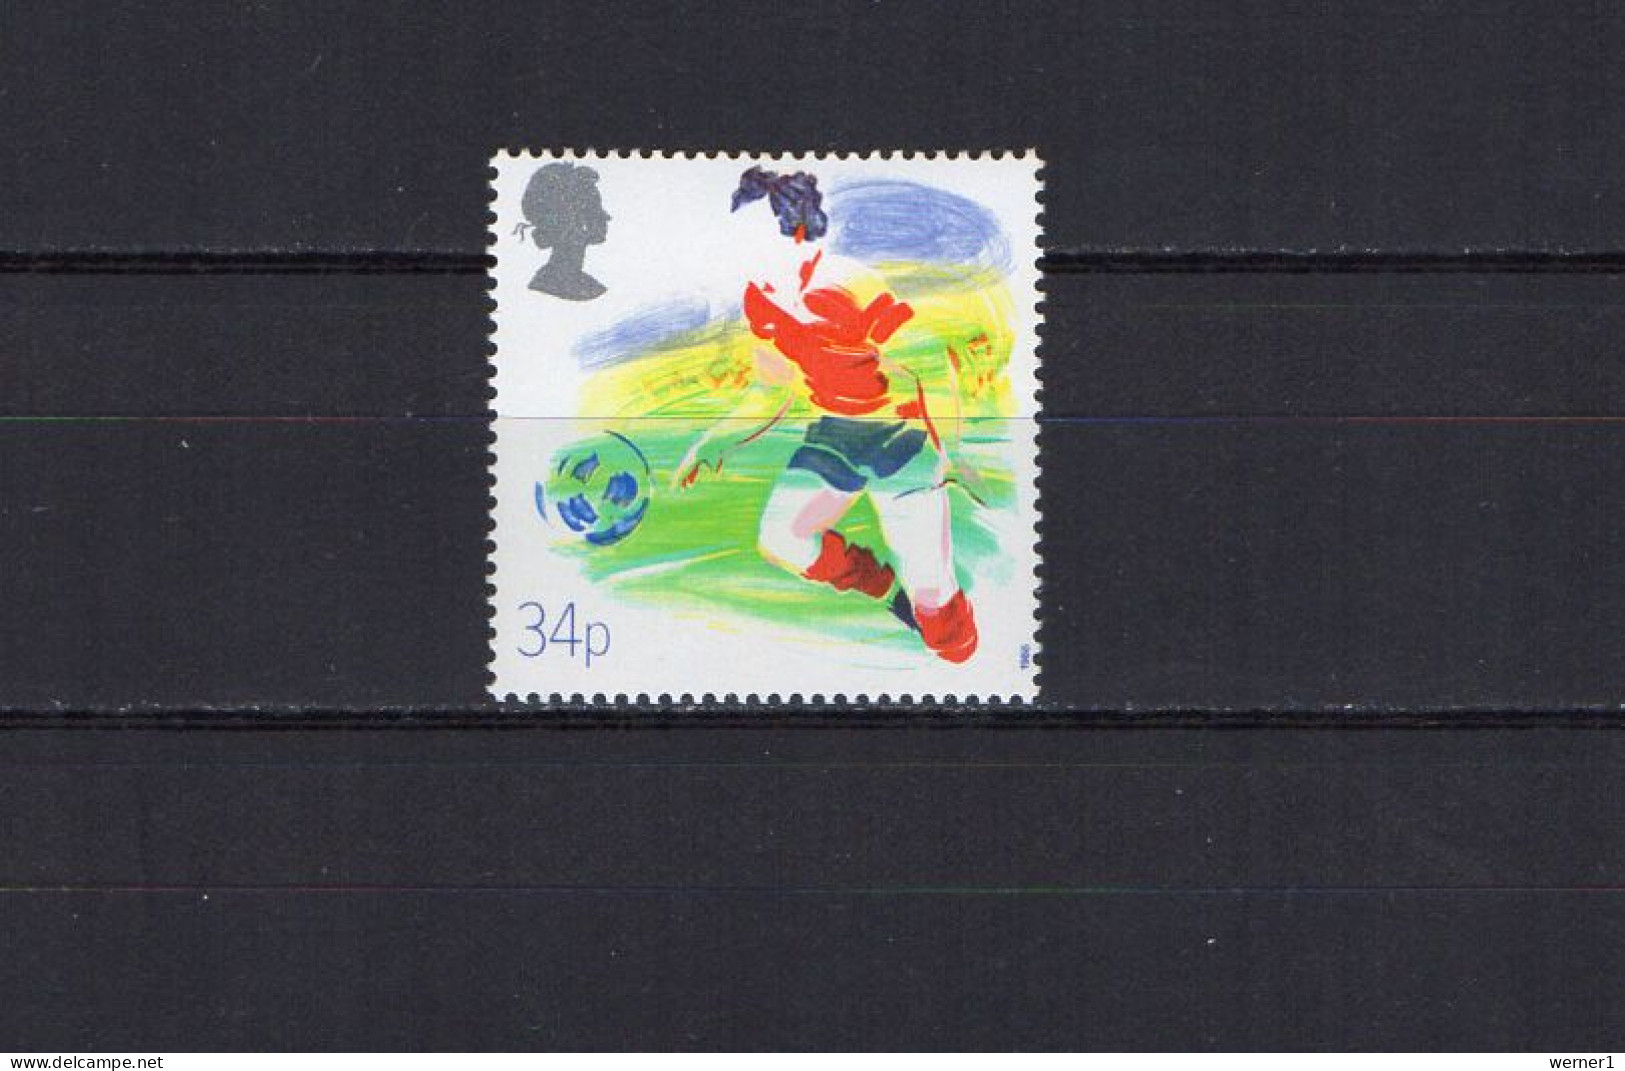 UK England, Great Britain 1988 Football Soccer Stamp MNH - Unused Stamps